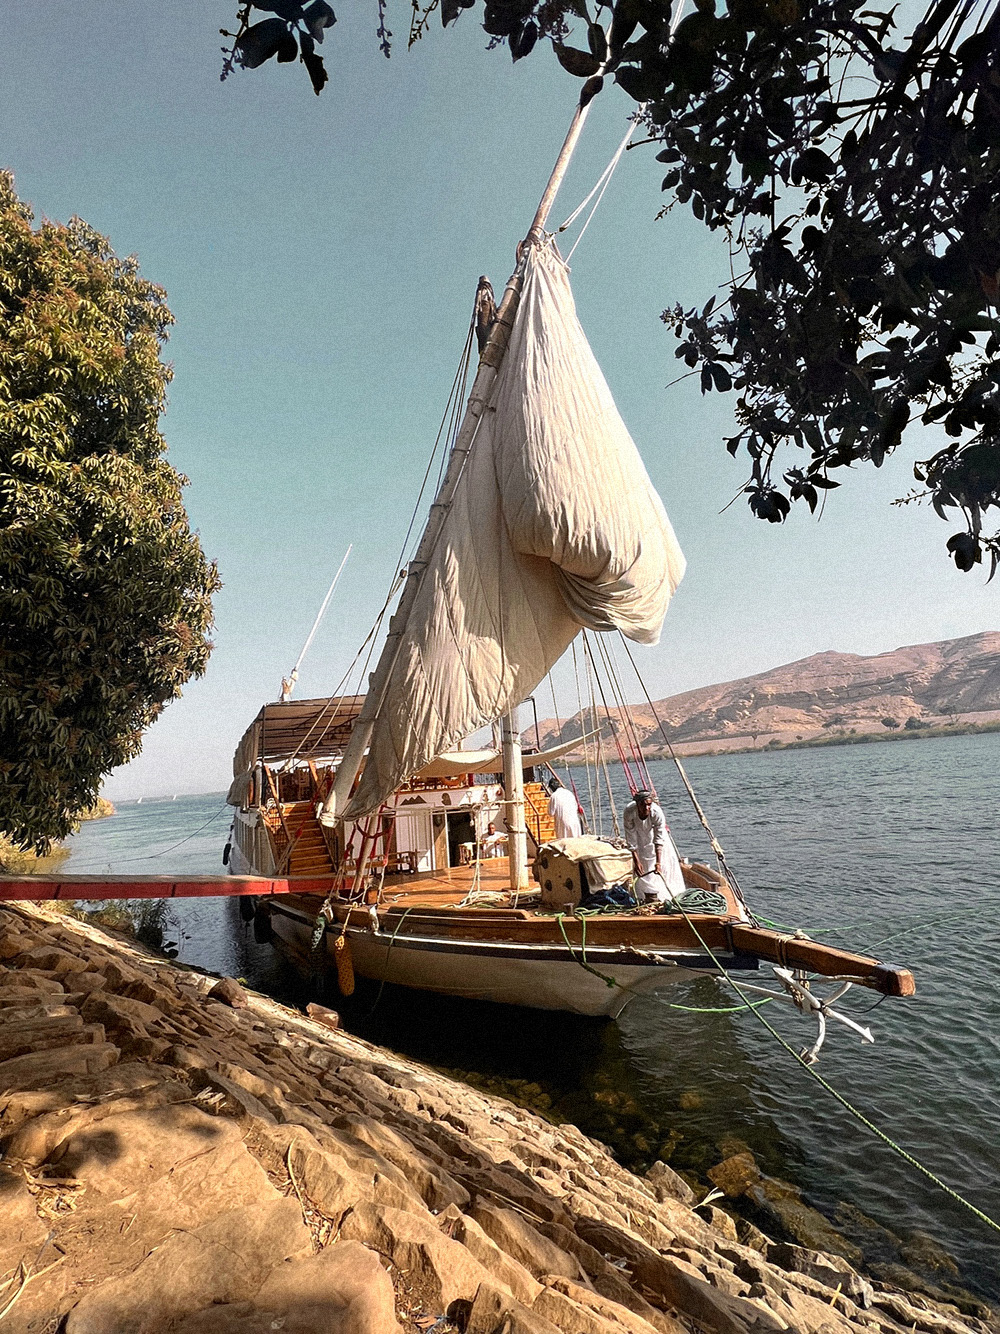 Dahabiya is the iconic wooden boat of the Nile with its white sails